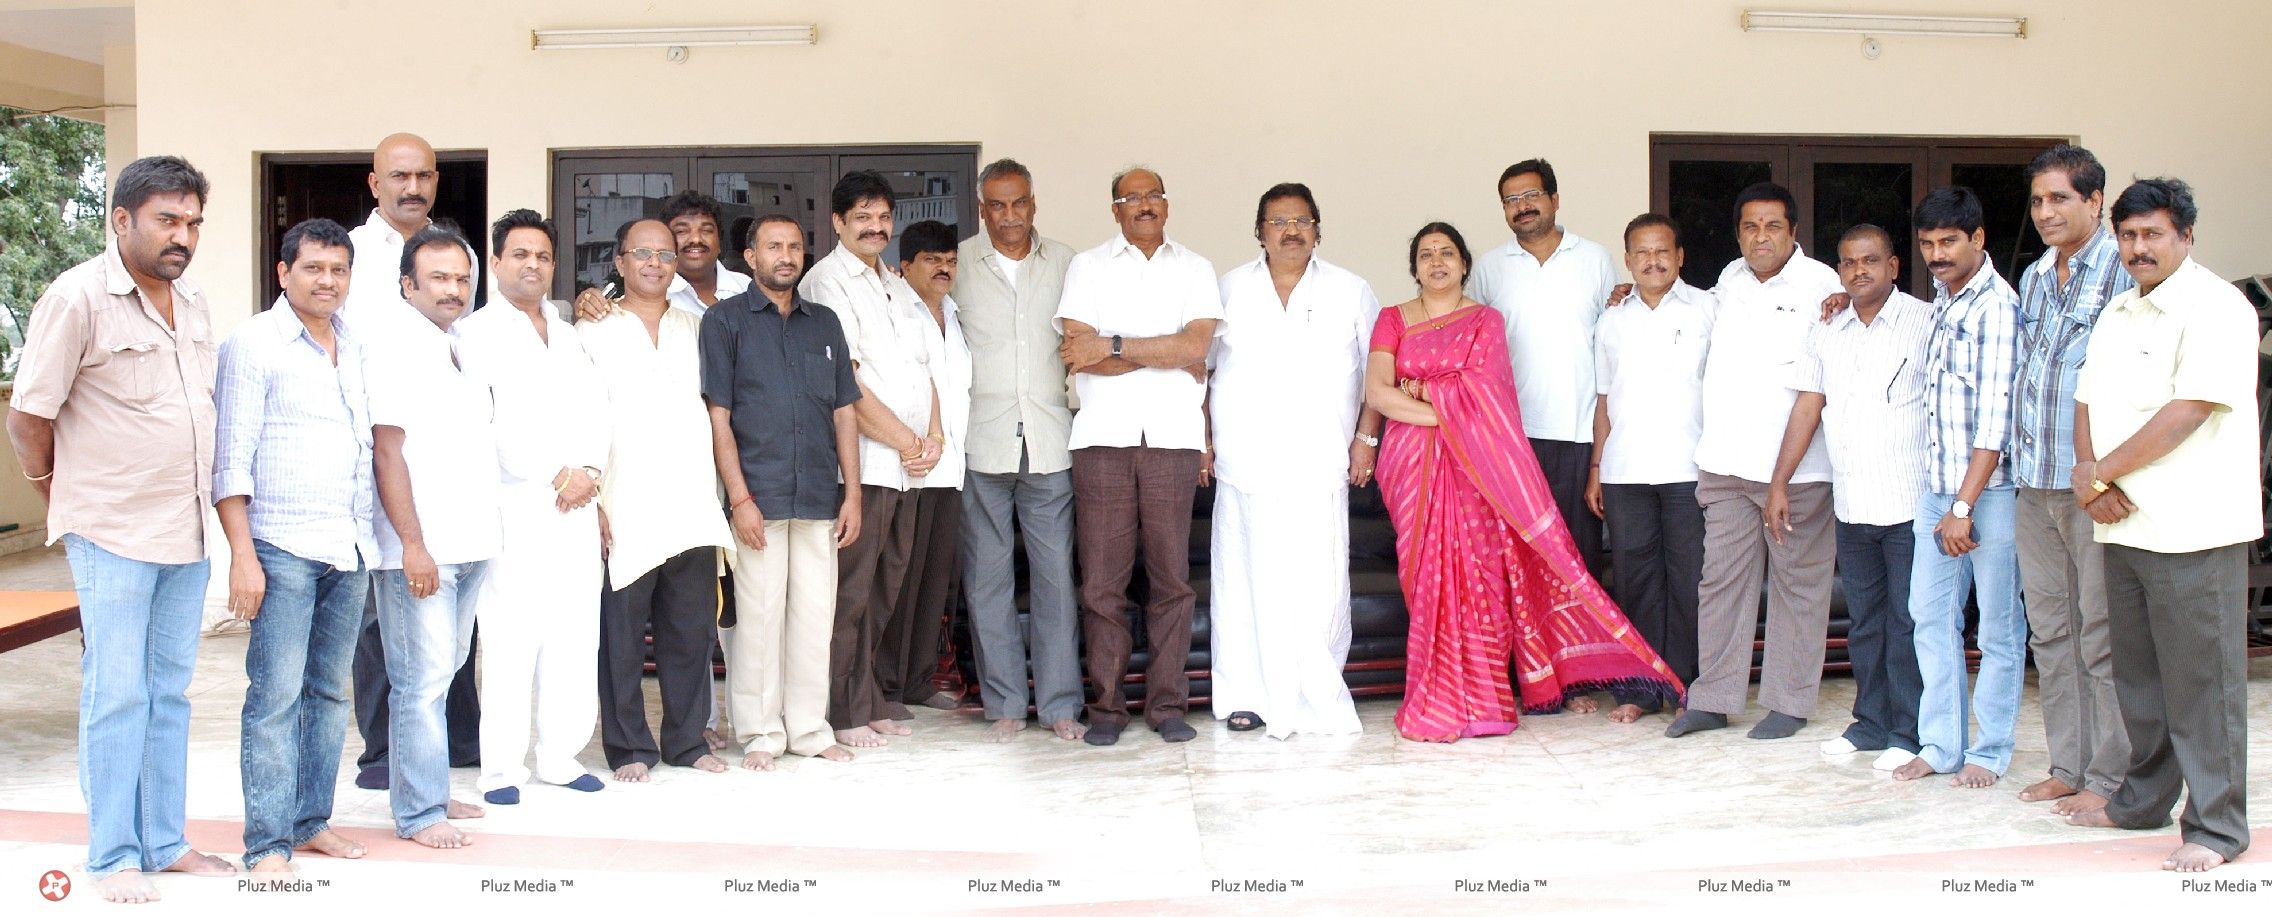 Telugu Film Chamber Counsil Election Photos | Picture 241669